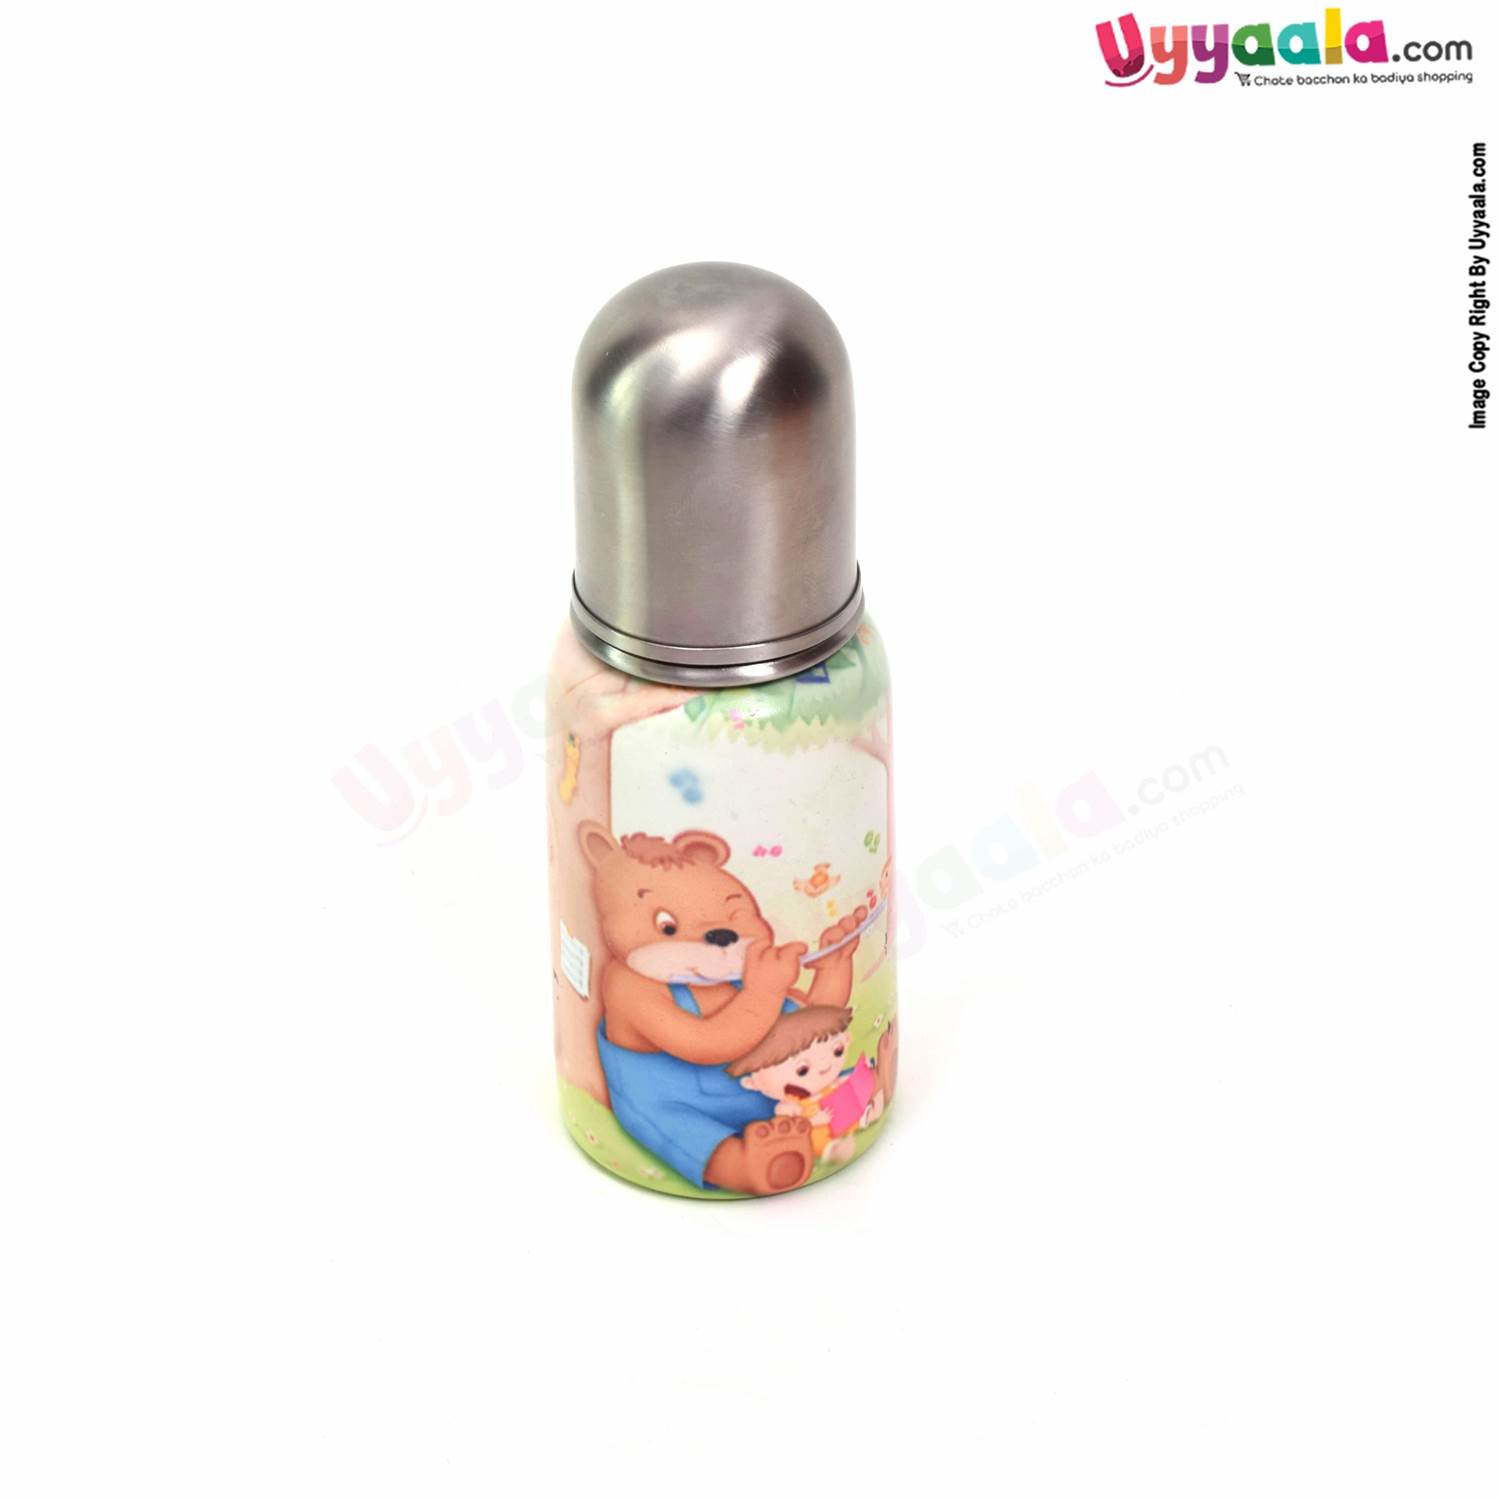 Stainless Steel Baby Feeding Bottle With Bear and Baby Print 220ml - Multicolor